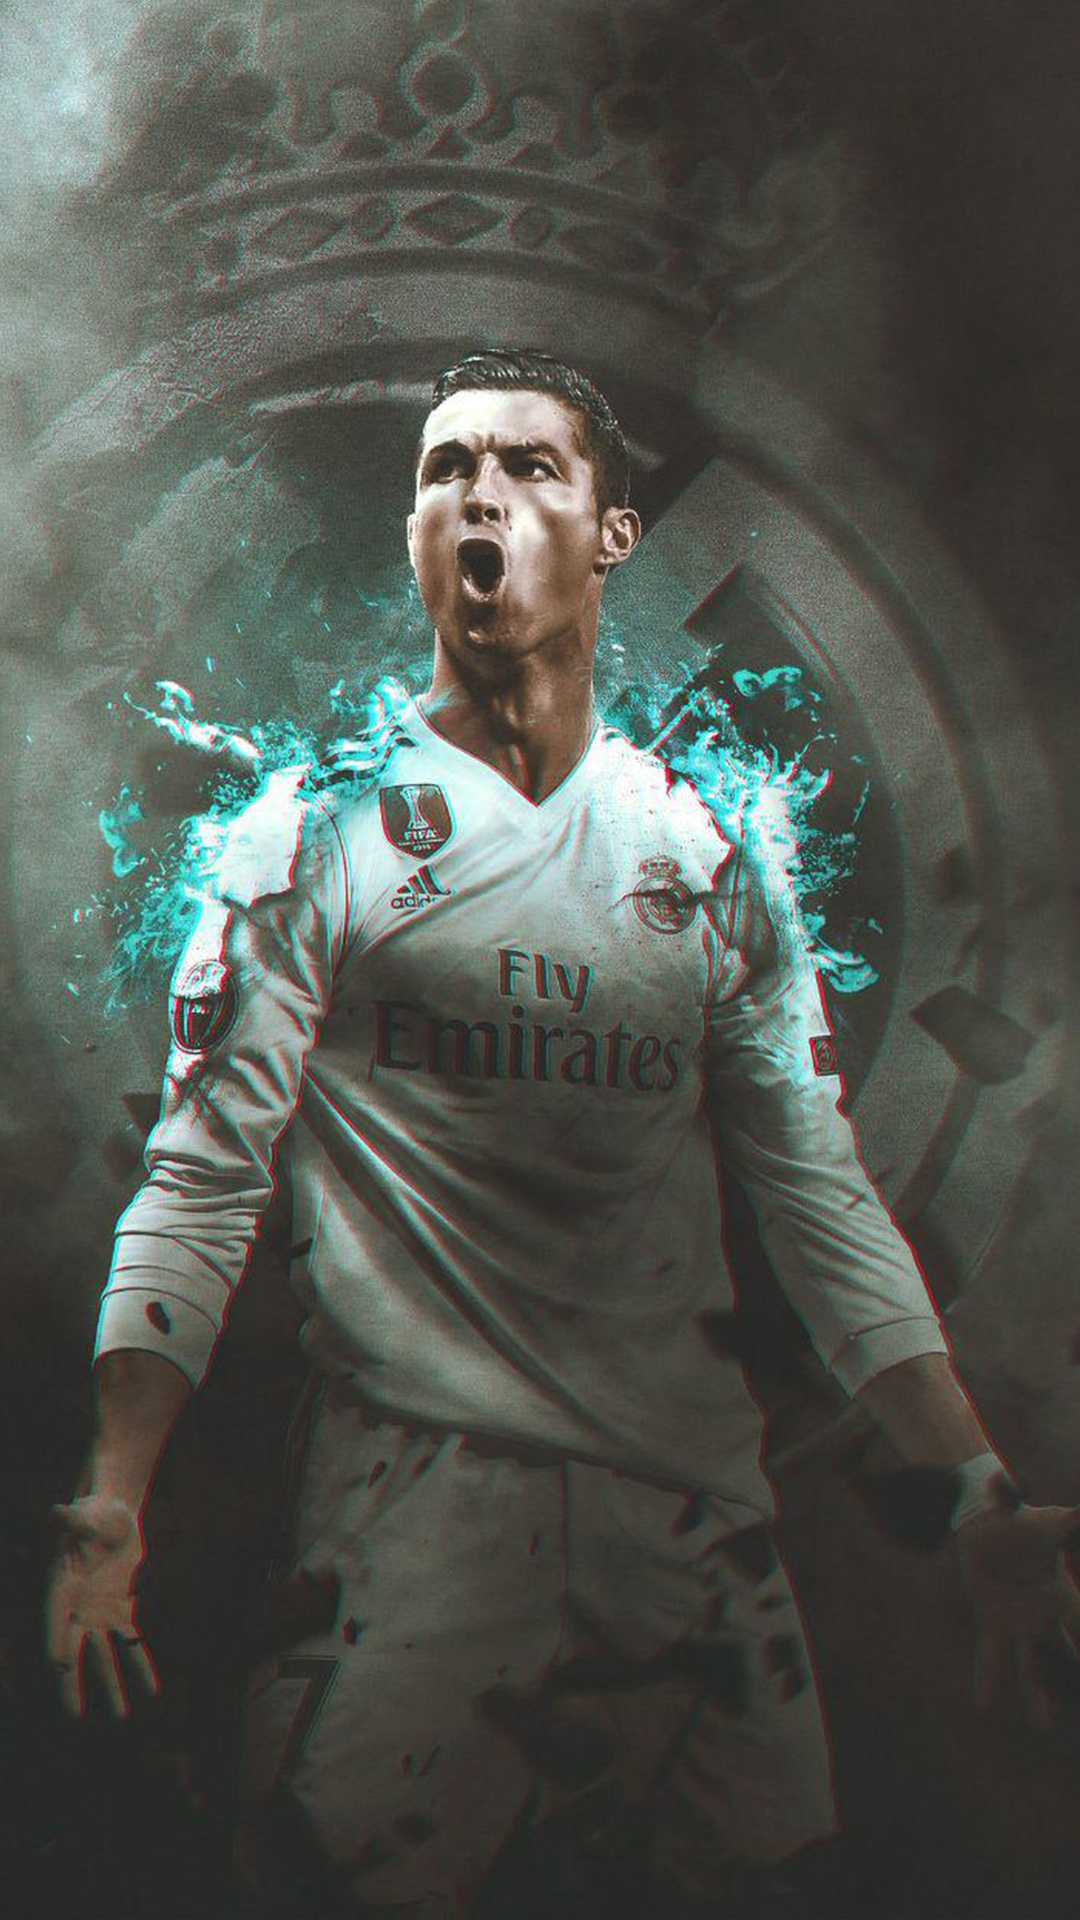 Fredrik on Twitter Cristiano Ronaldo wallpaper for your phone   HalaMadrid cr7 ElClasico RMFC  RTs are very very appreciated  httpstcoShlK4xPwzb  Twitter